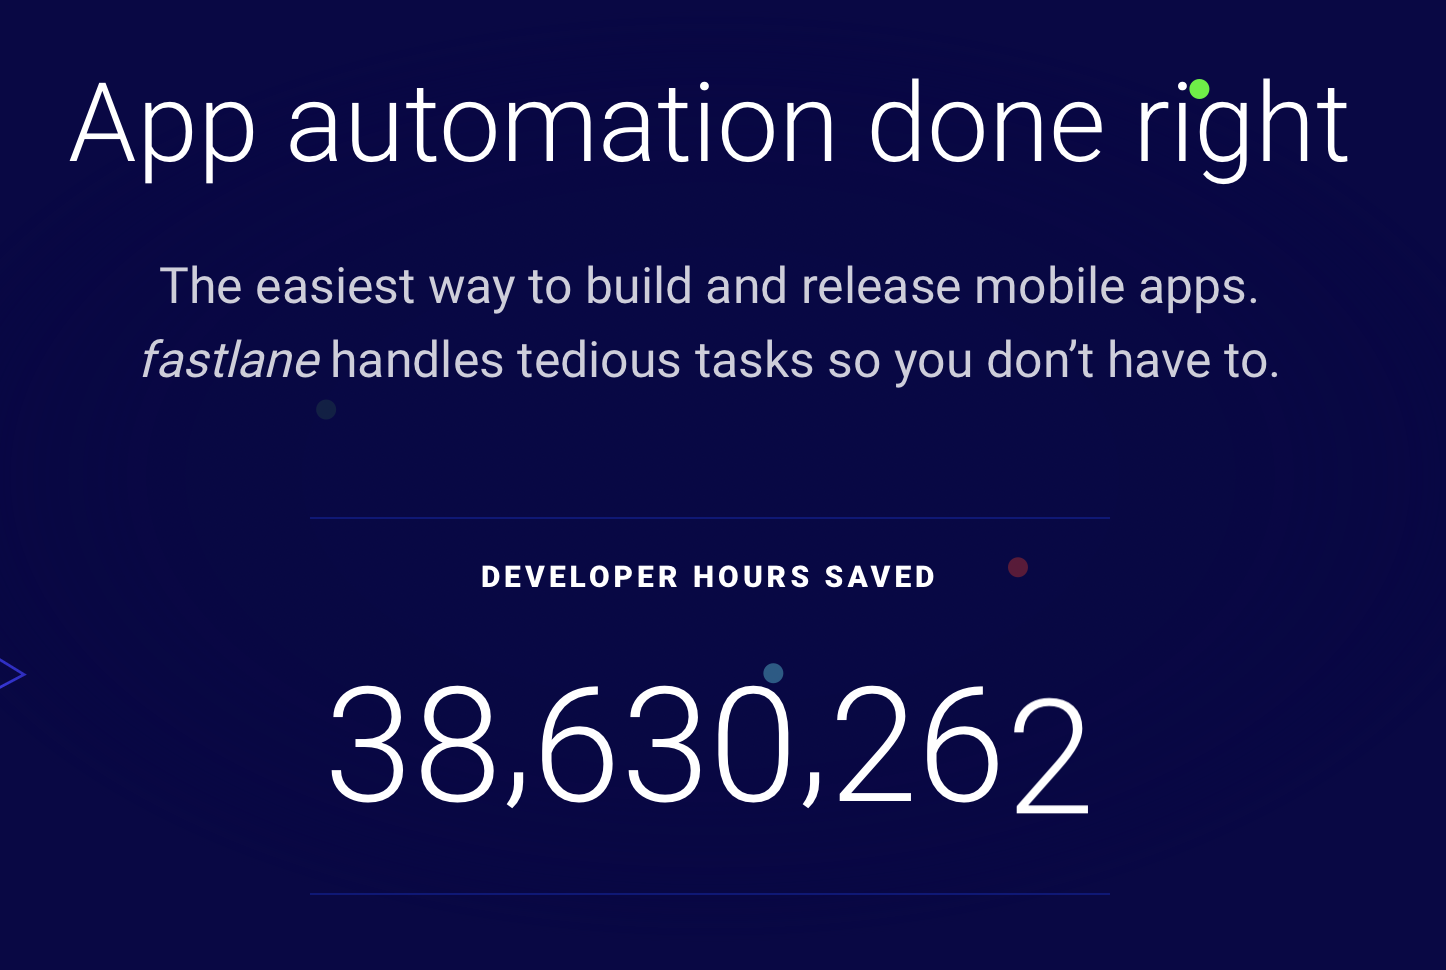 Graphic of "developer hours saved" on the fastlane website